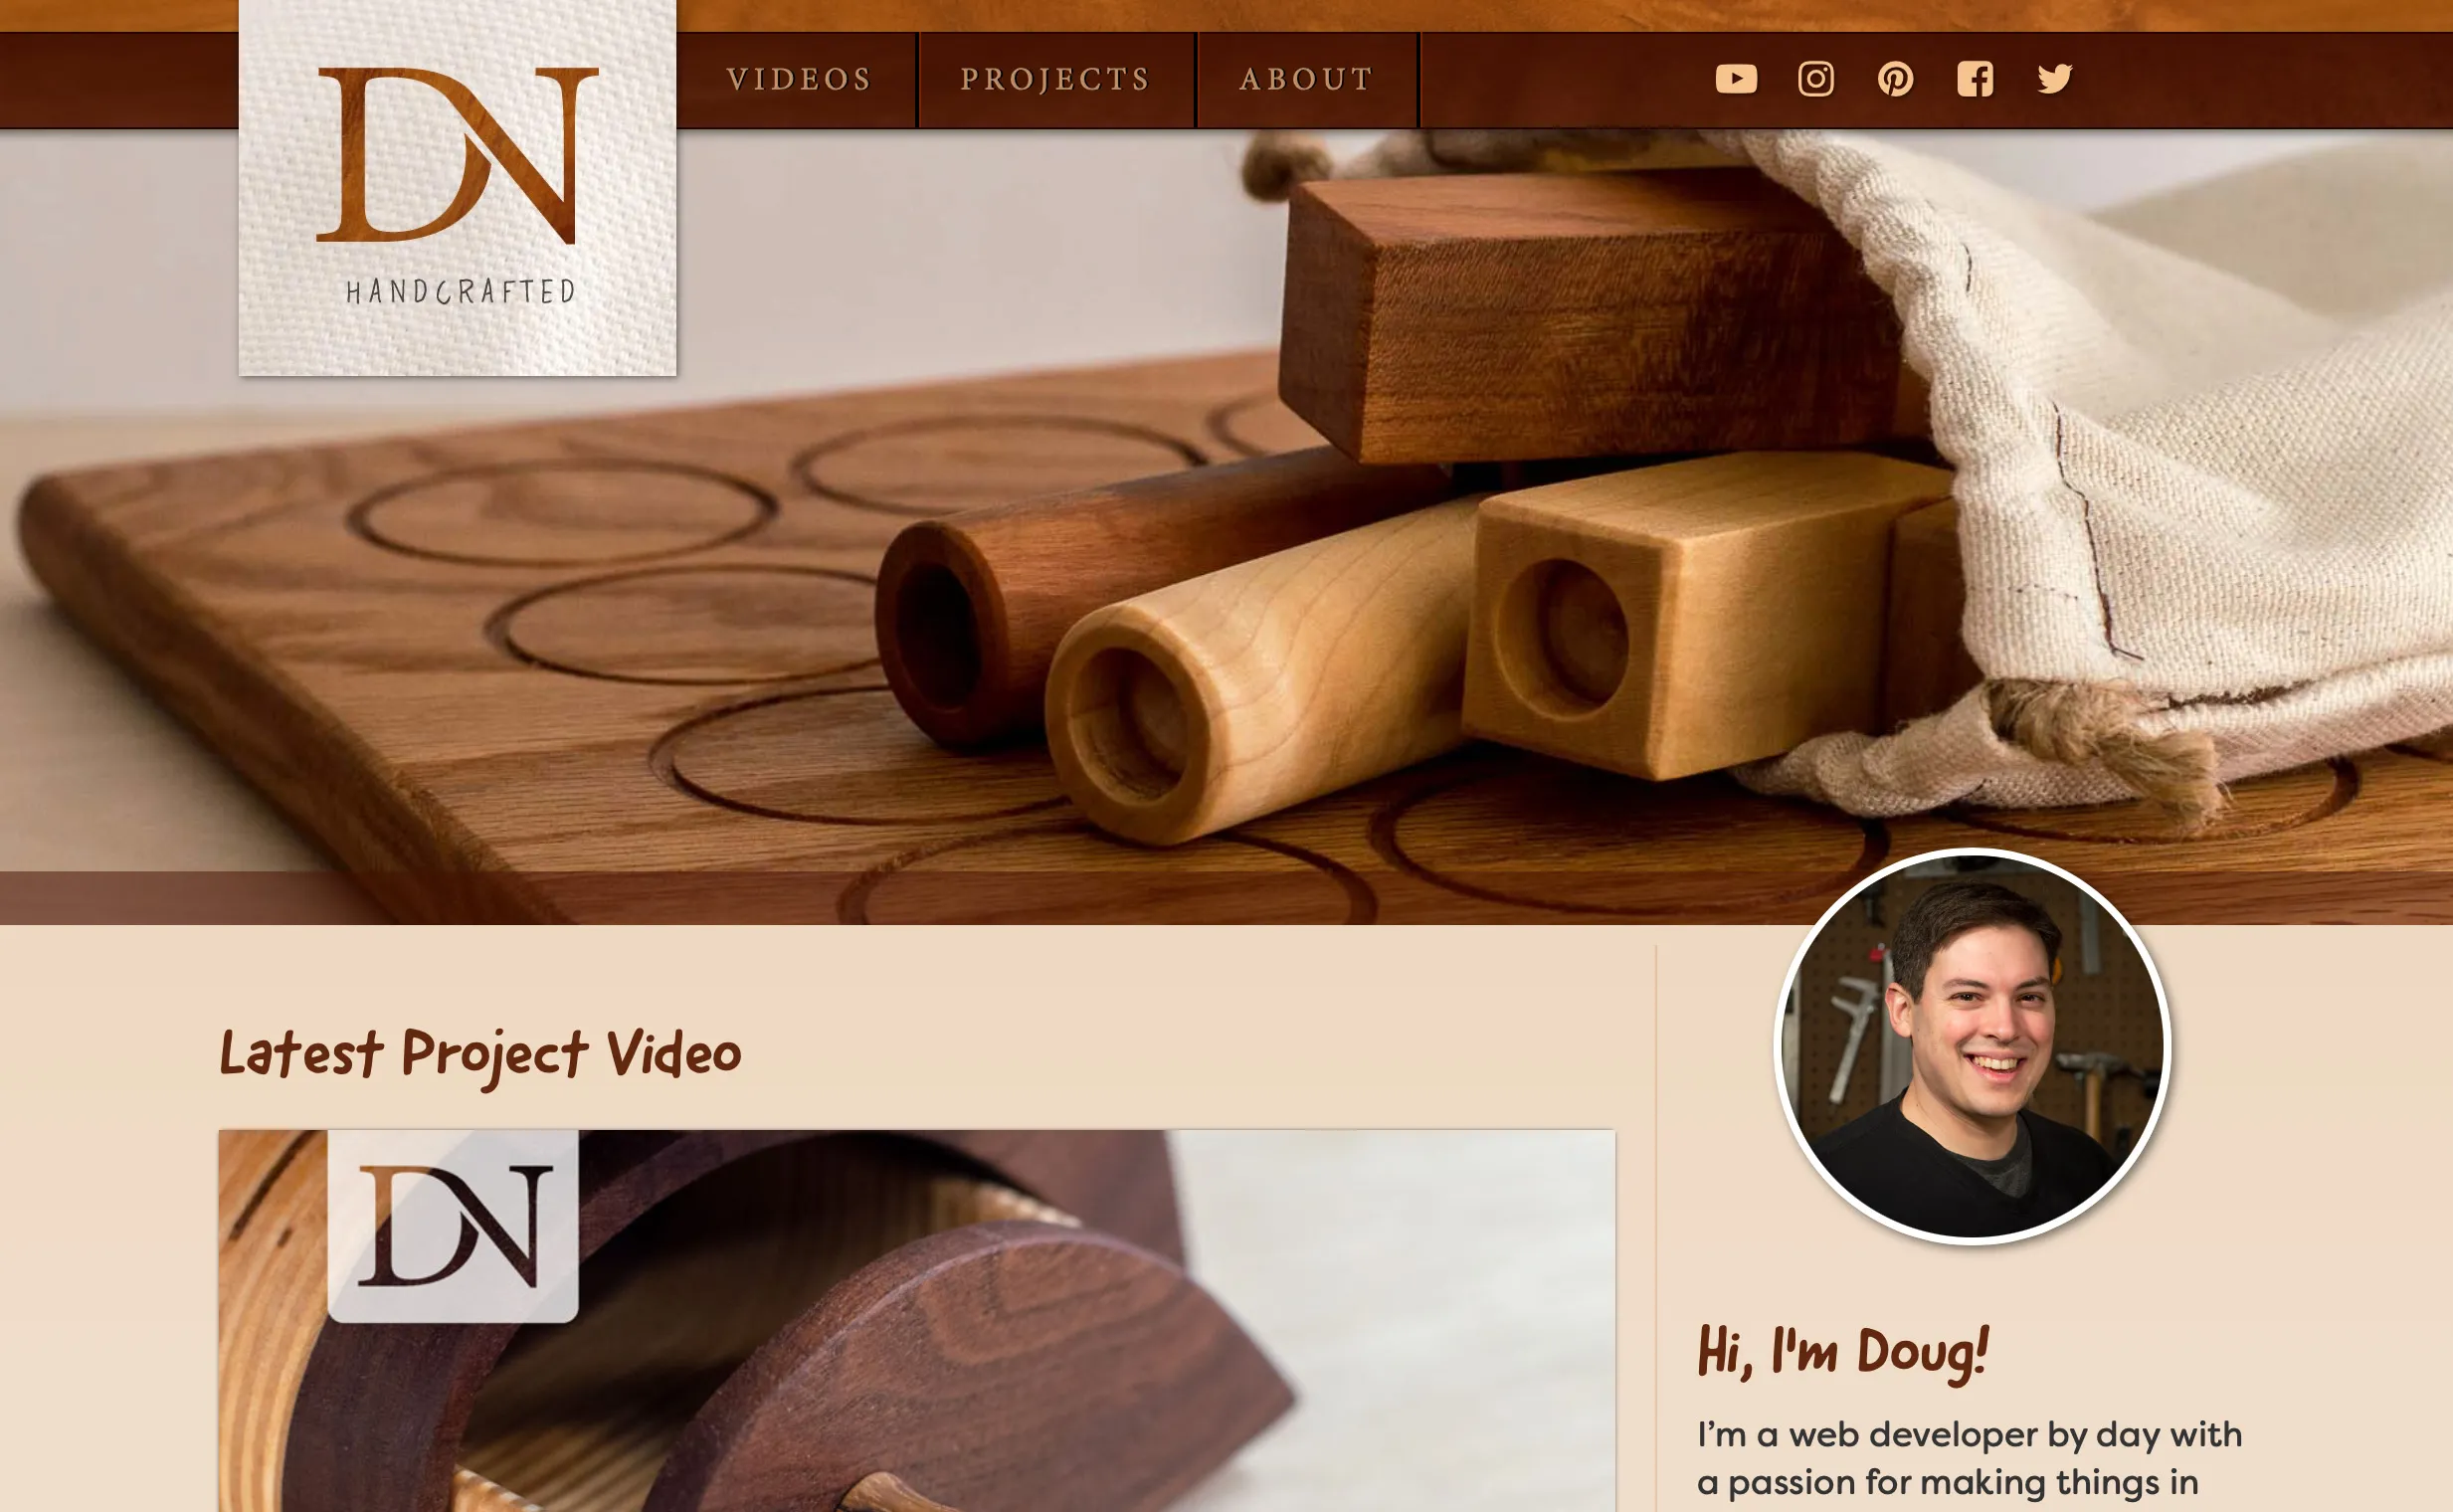 Screenshot of dnhandcrafted.com design which features a close-up of a woodworking project and has warm wood tones for colors.